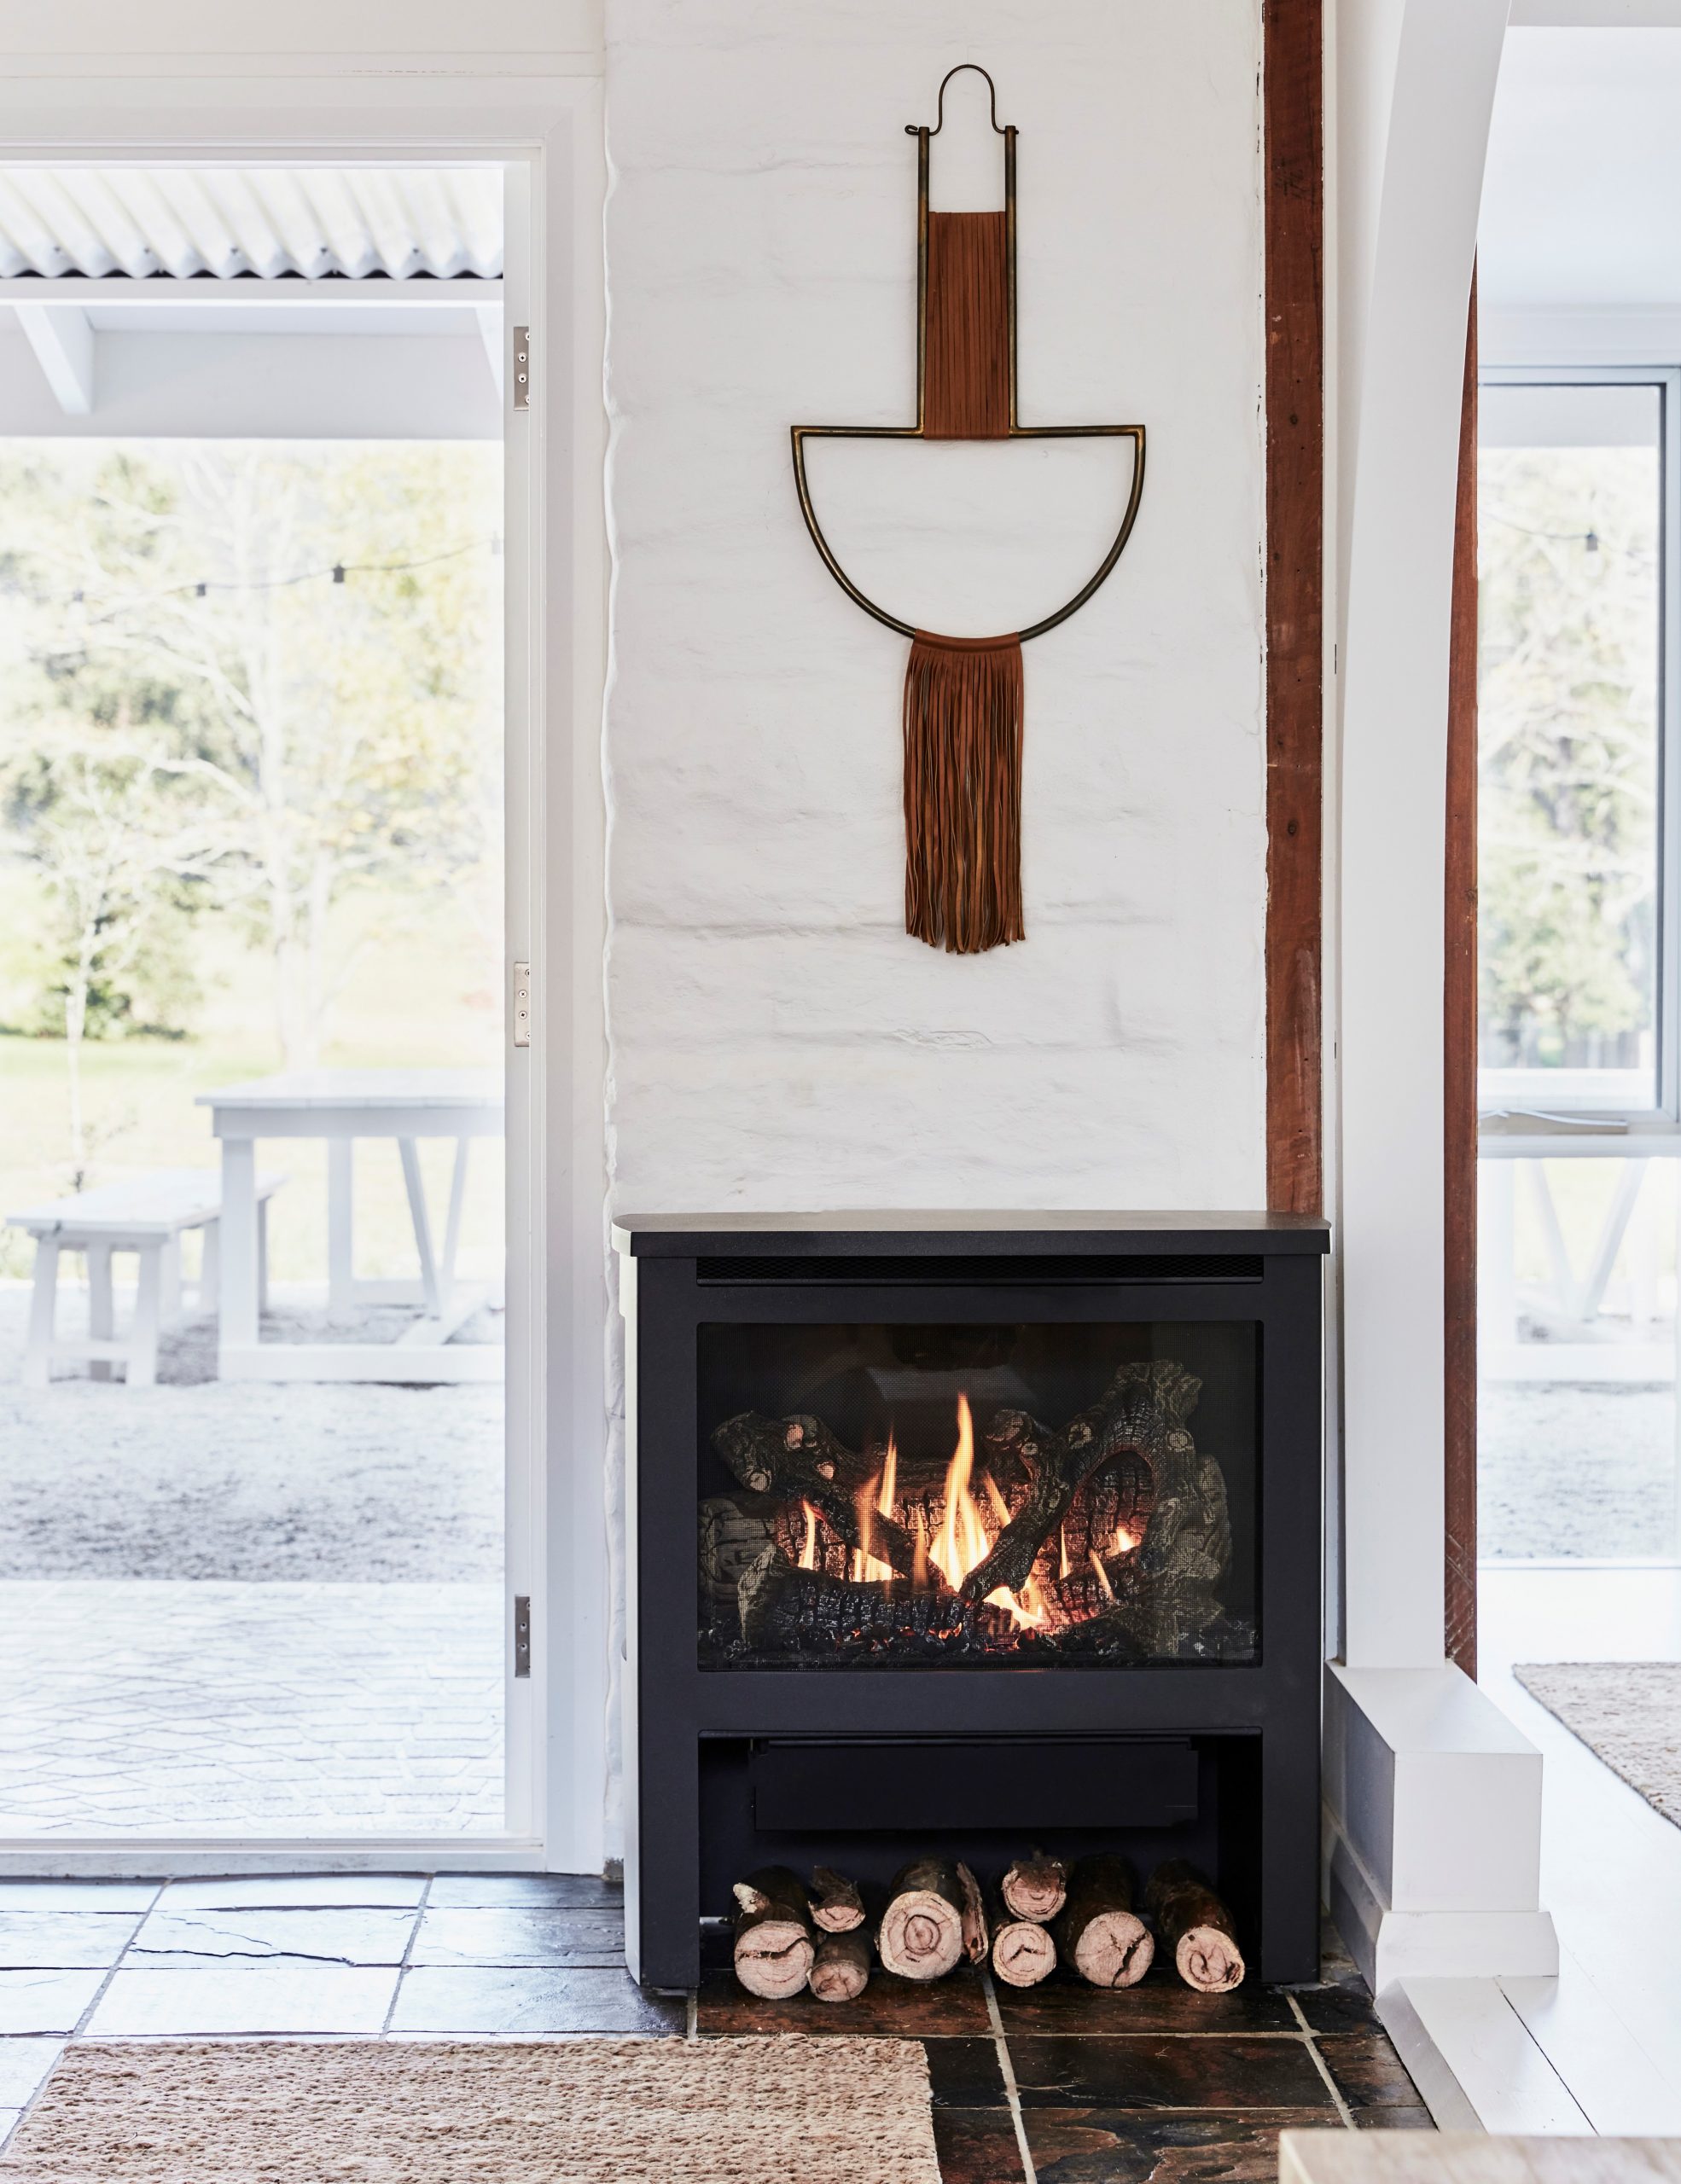 WOOD HEATER PERFORMANCE WITH THE EASE OF GAS!